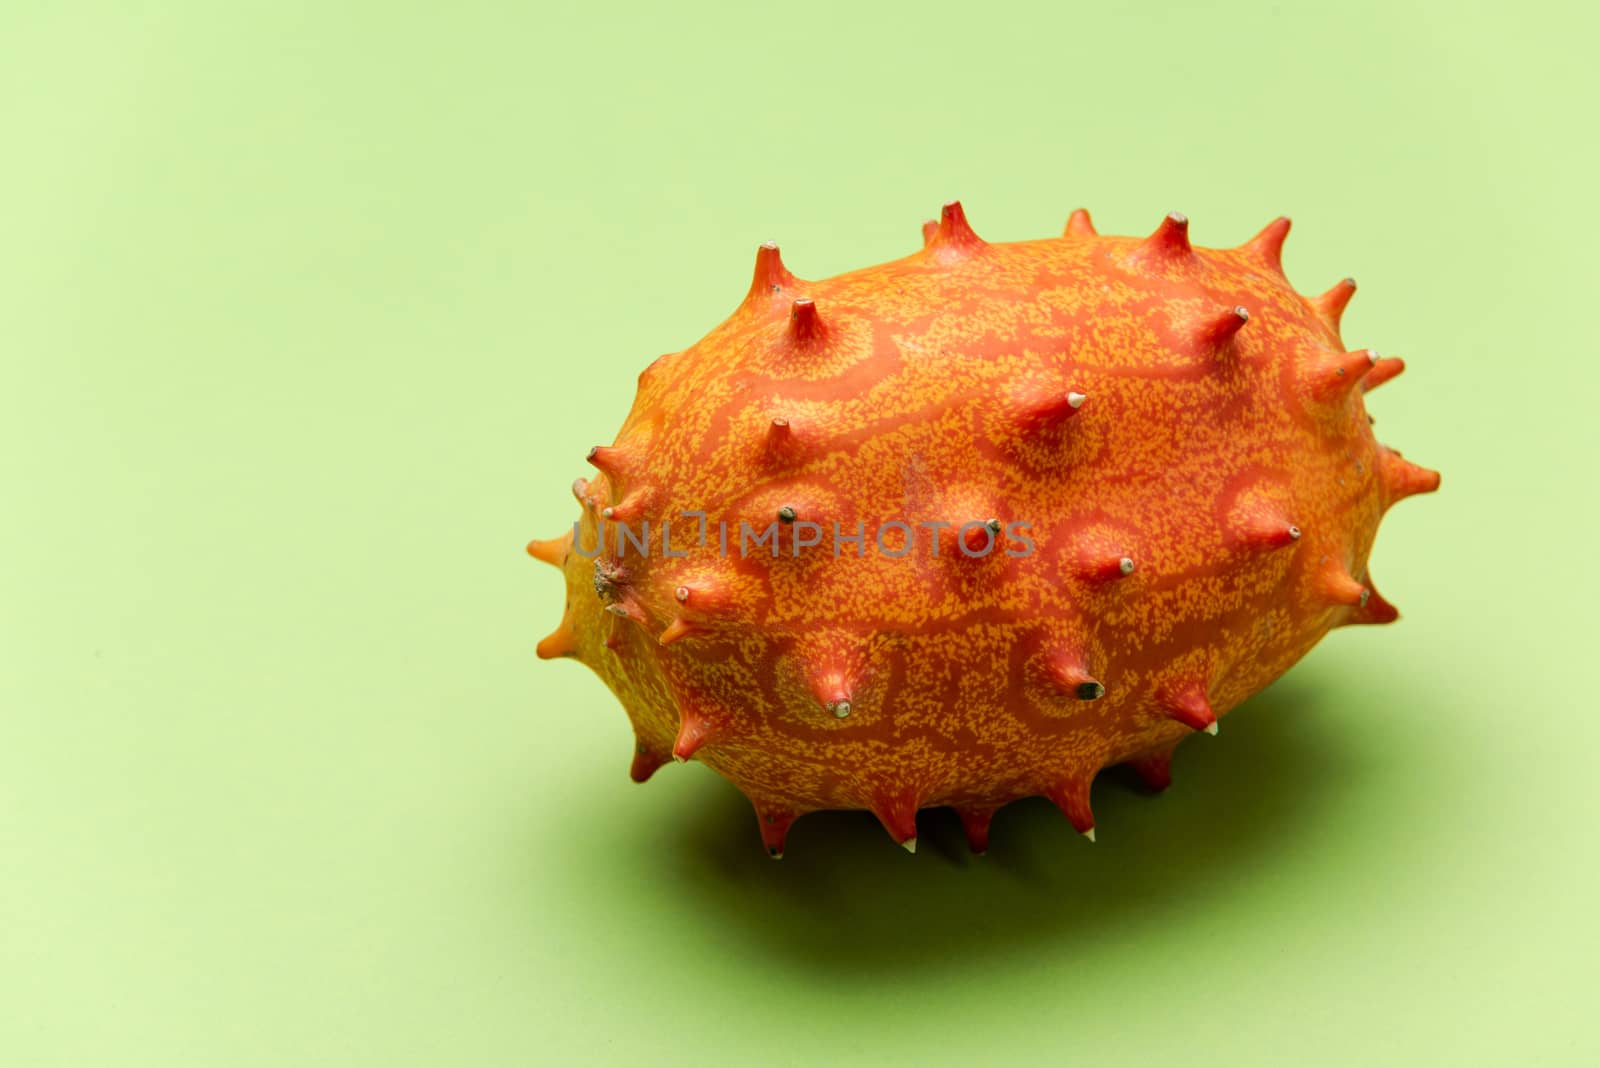 Whole Kiwano or Horned Melon Fruit. Close Up View. Exotic Fruits by merc67